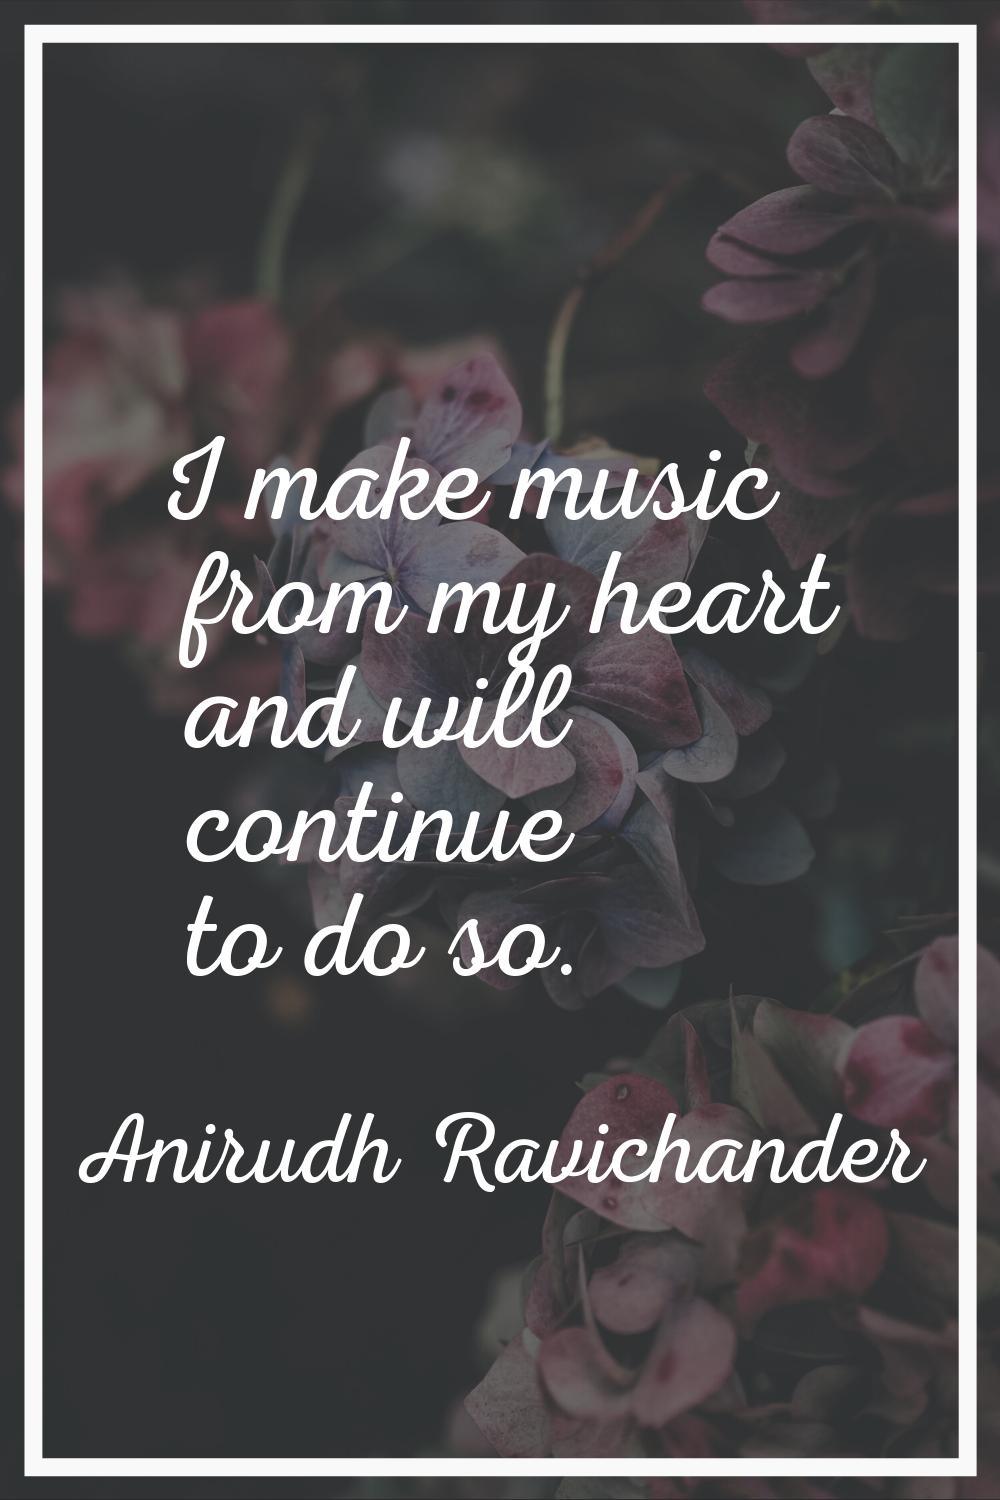 I make music from my heart and will continue to do so.